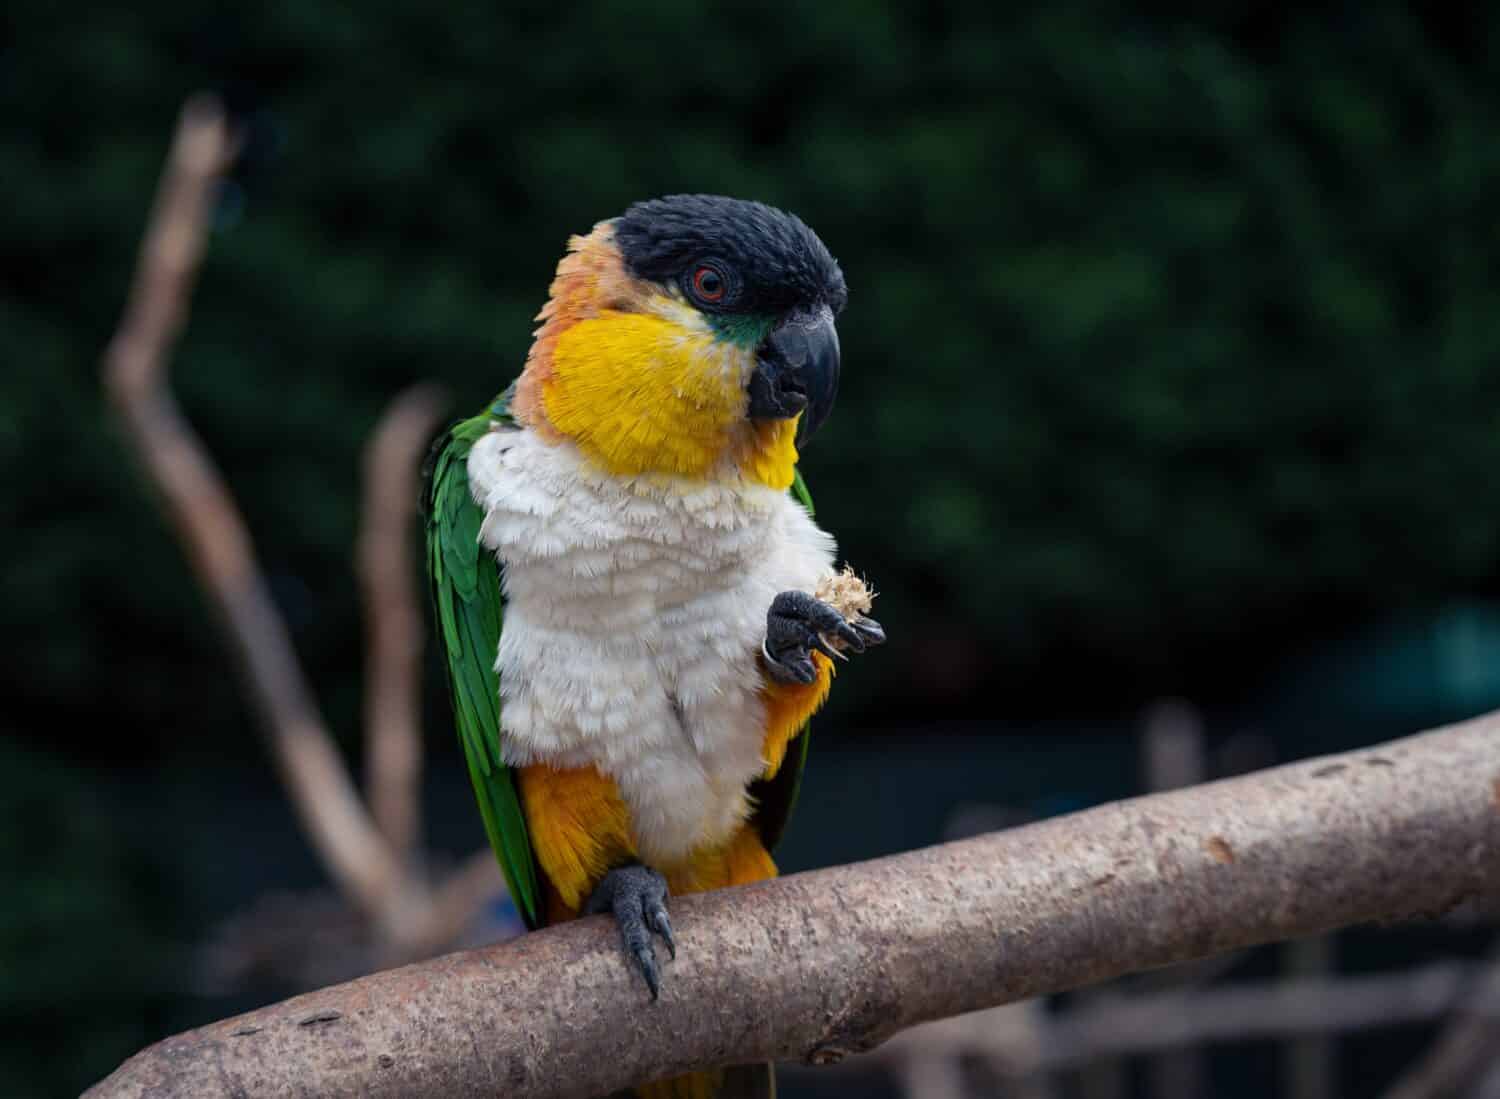 A black-headed parrot perching on a branch.